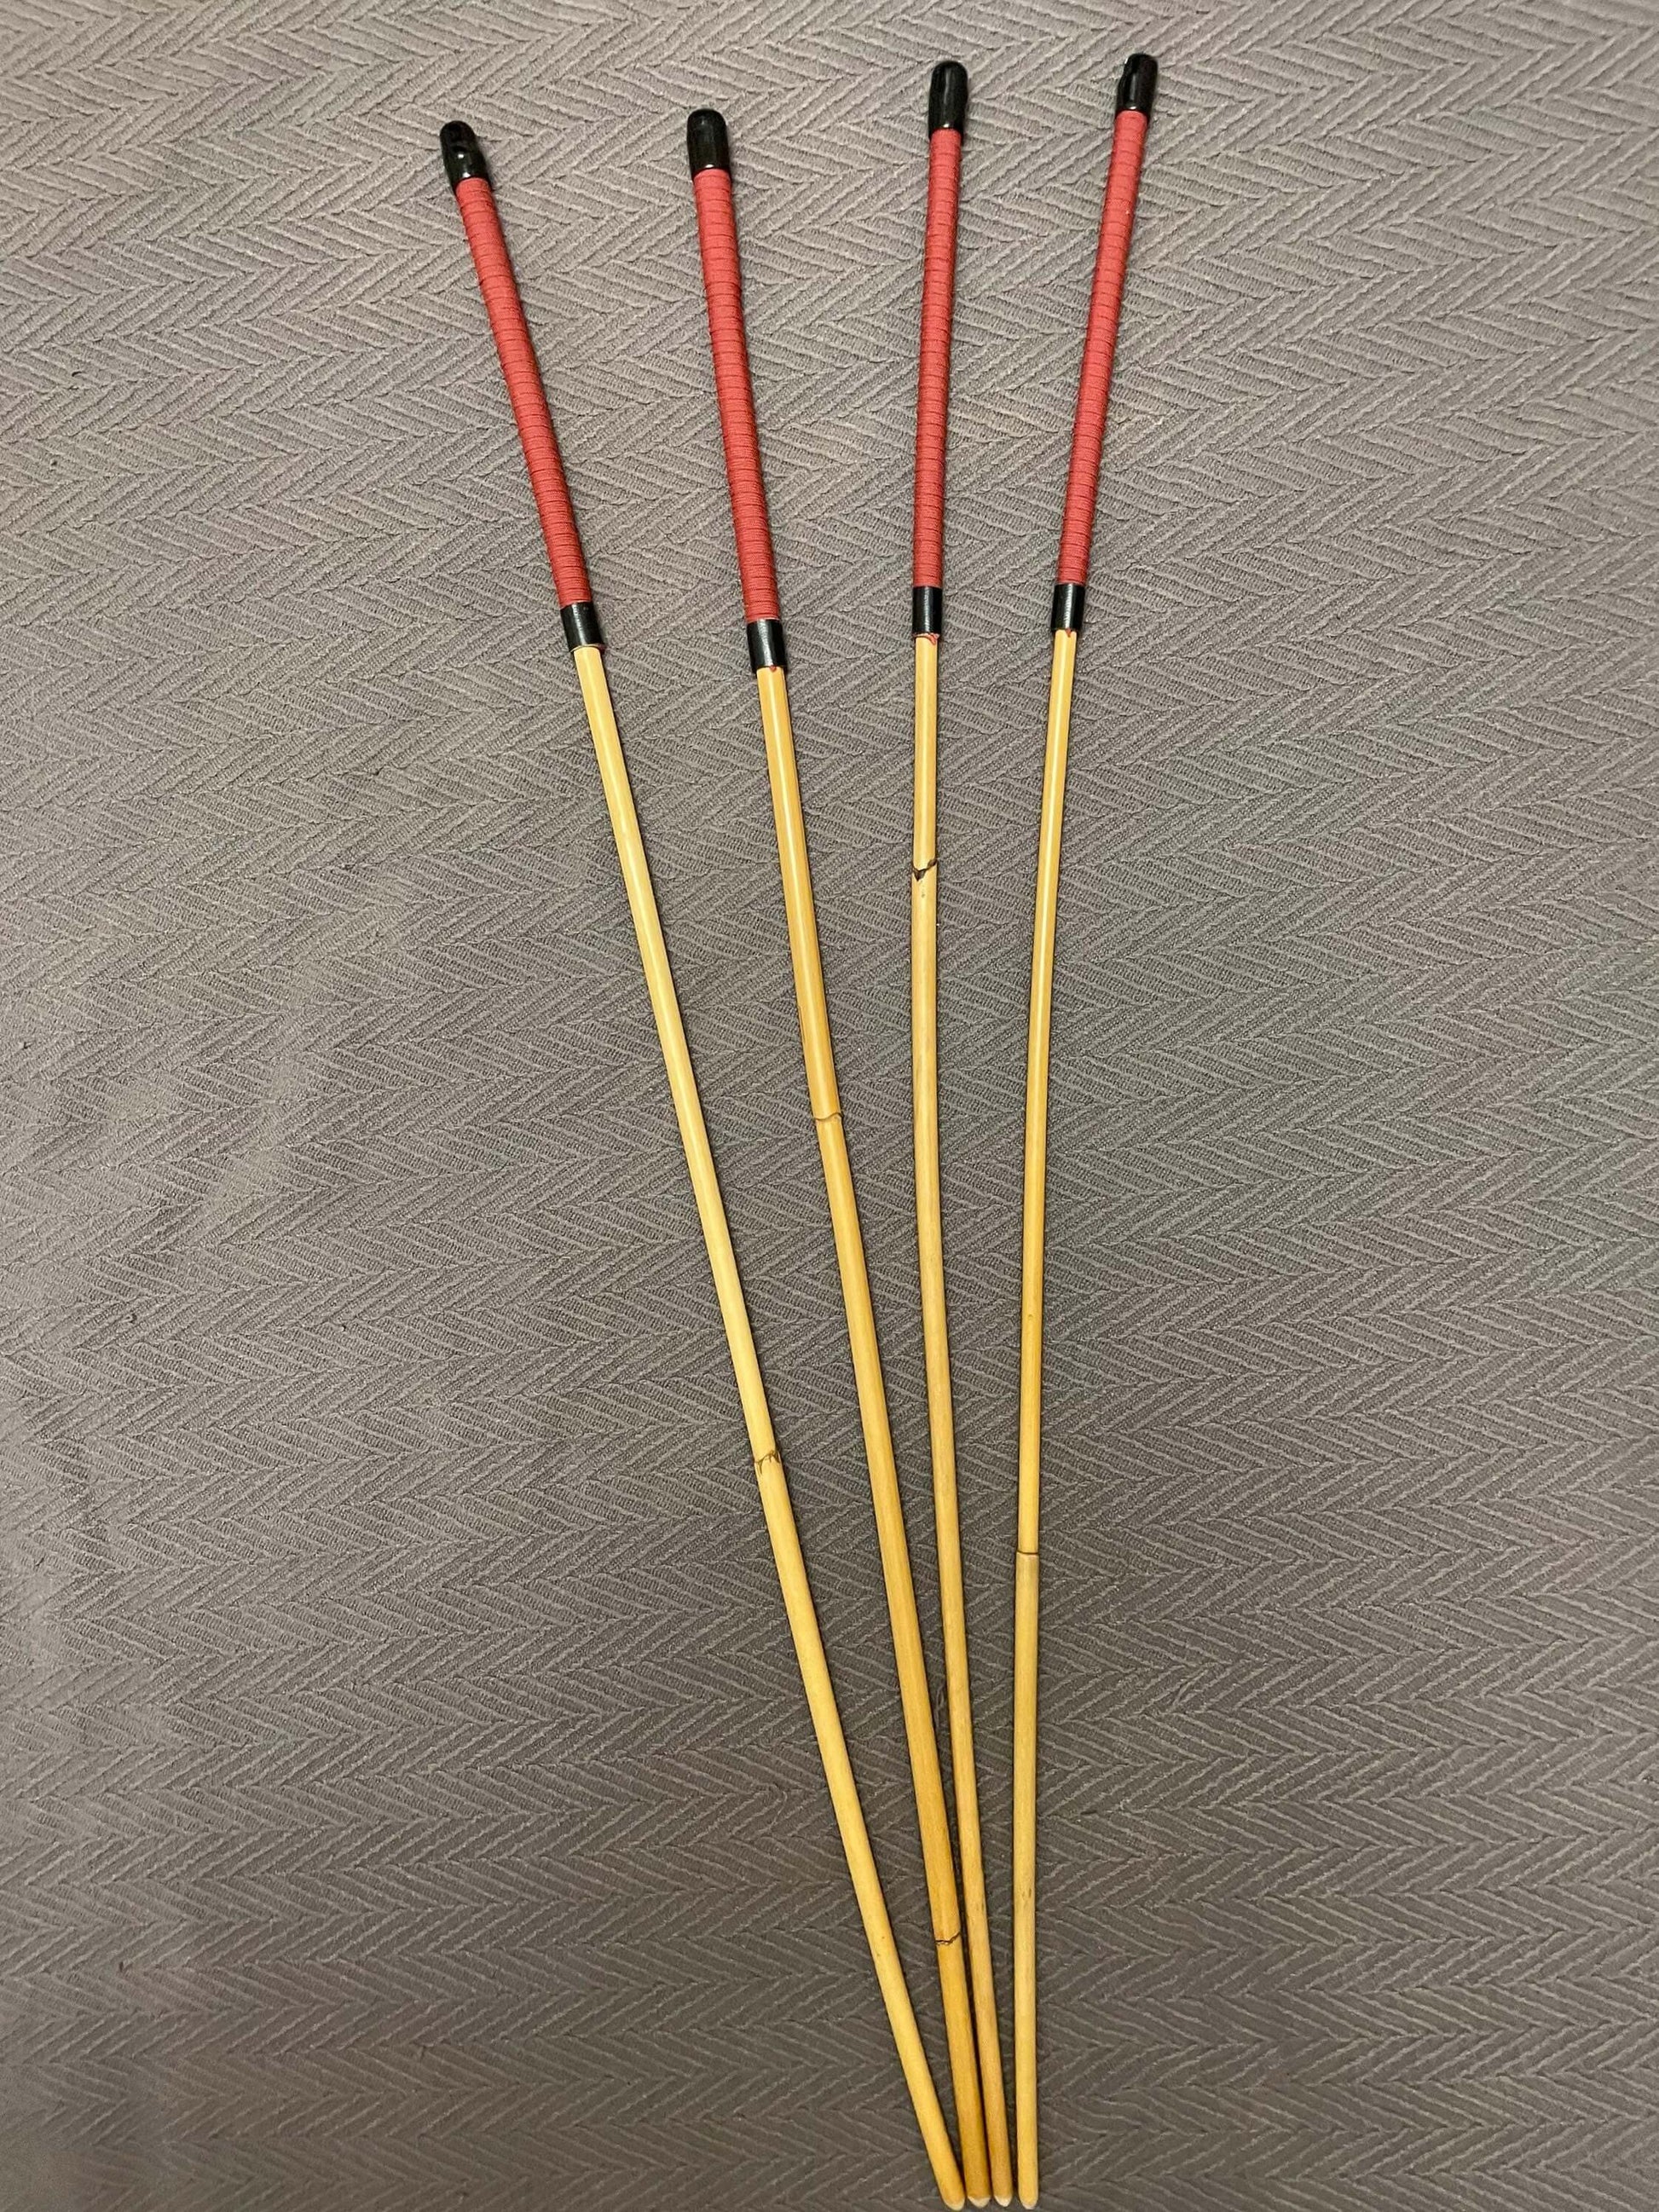 Set of 4 Dragon Canes with Red Paracord Handles